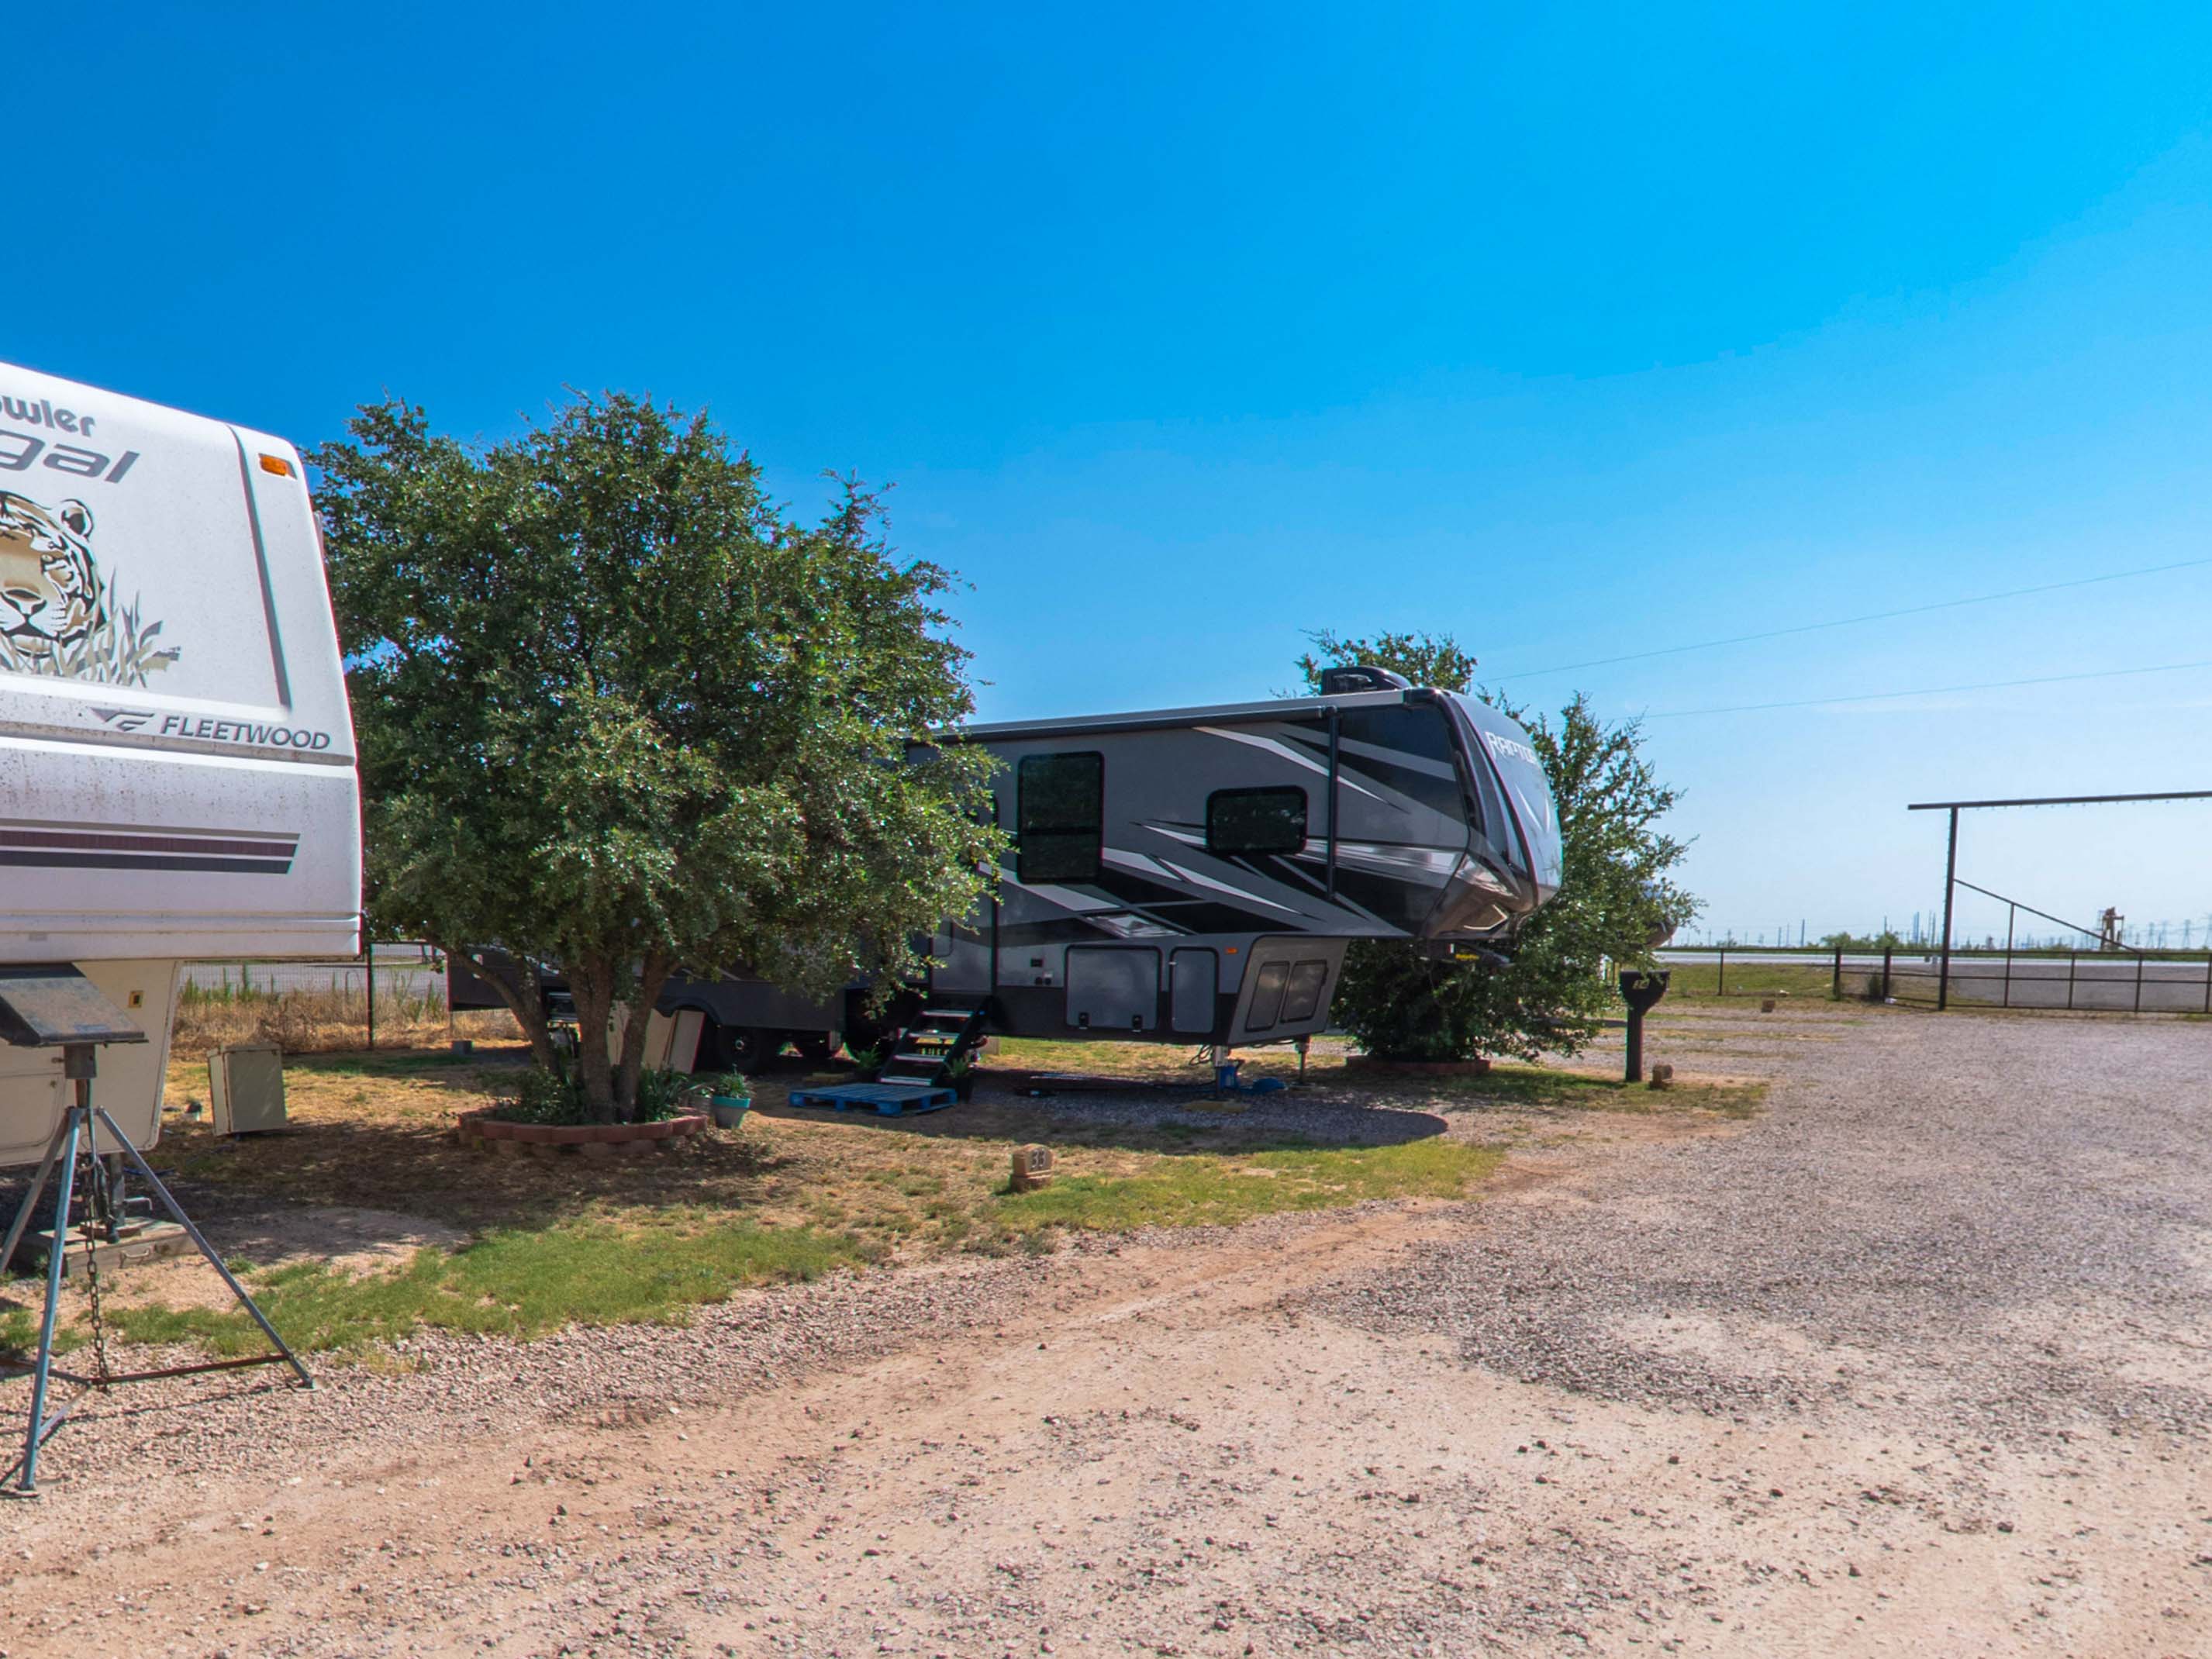 Wide RV spaces